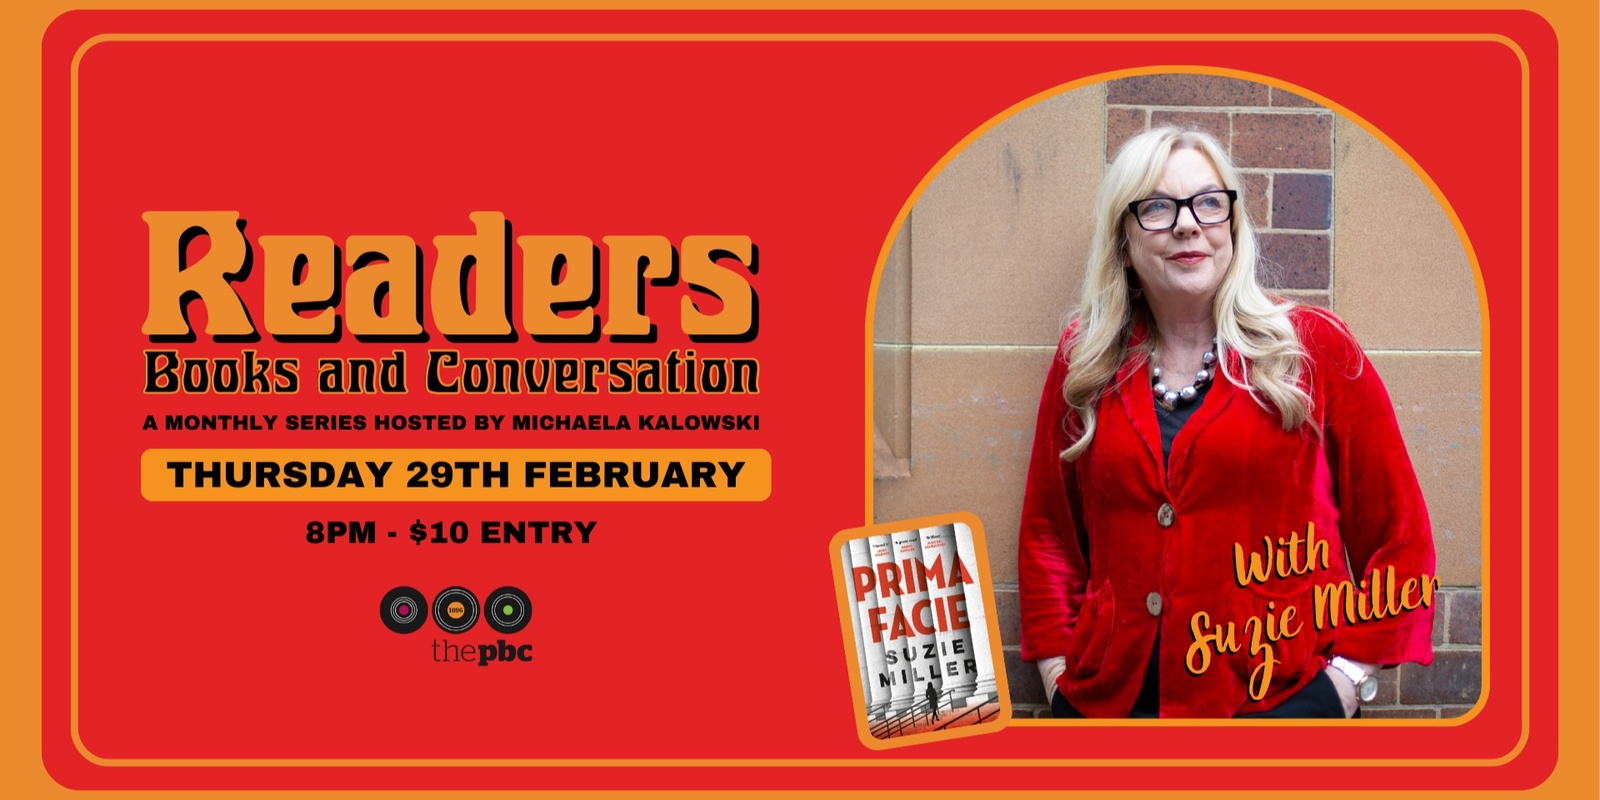 Banner image for READERS - Books and Conversation with Suzie Miller